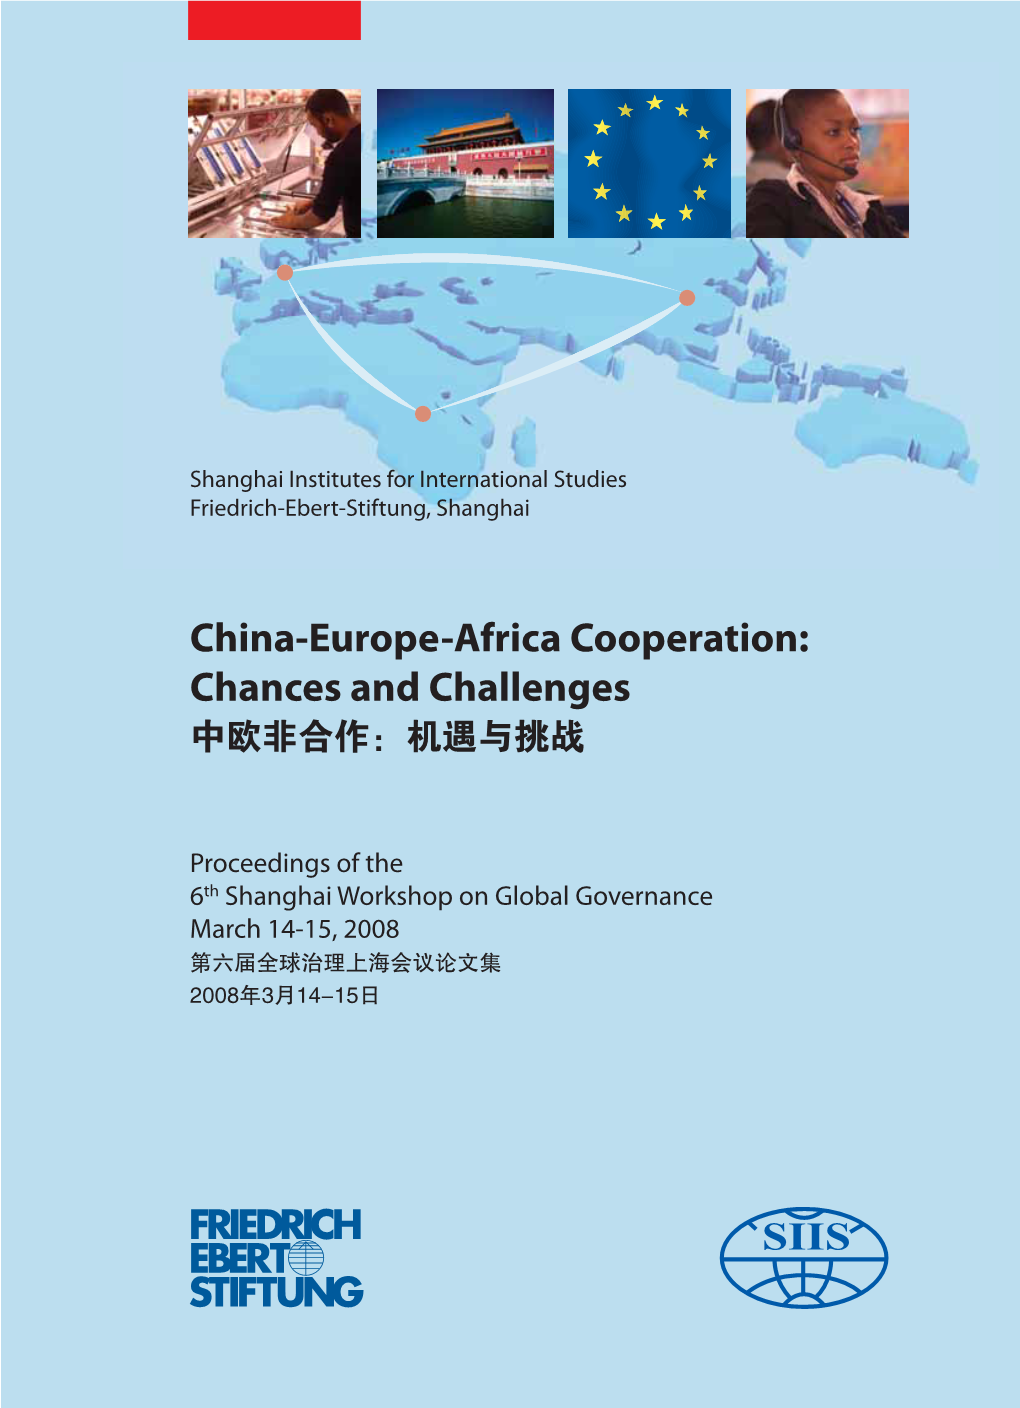 China-Europe-Africa Cooperation: Chances and Challenges